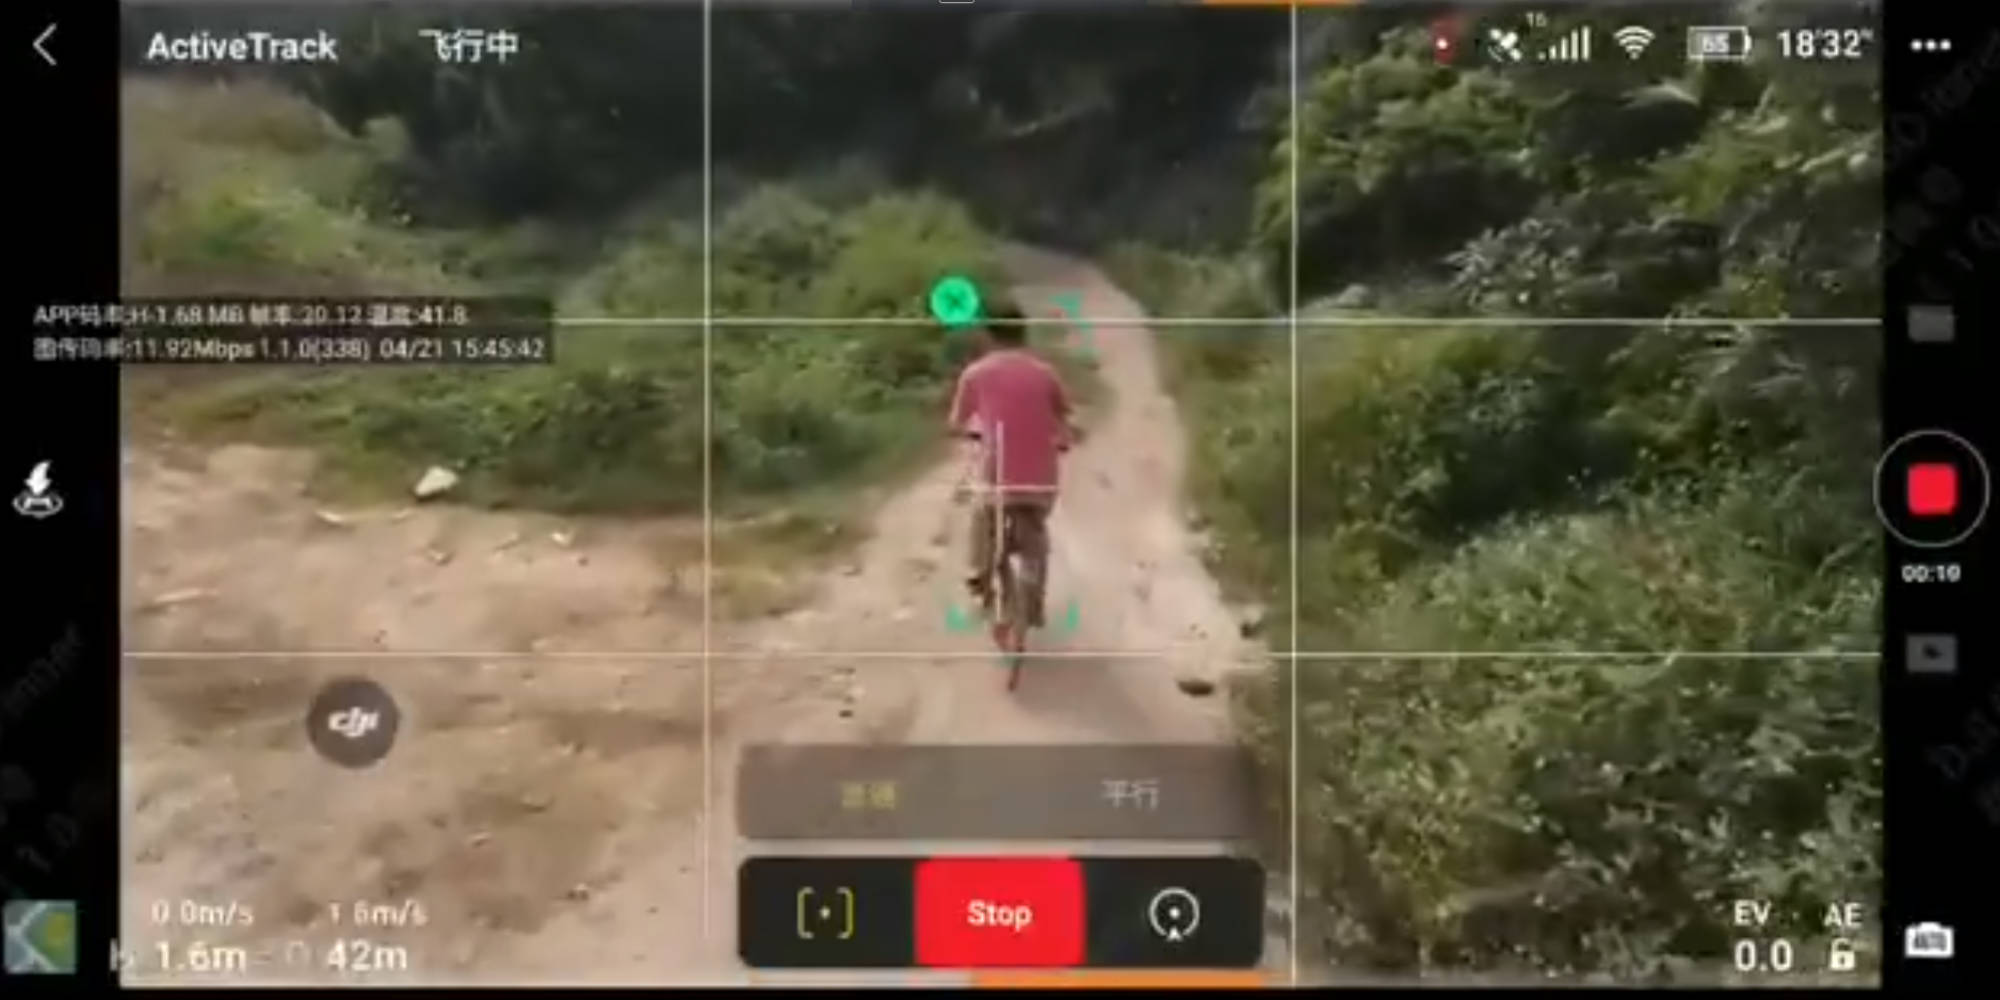 Is this ActiveTrack running on the Mavic Air